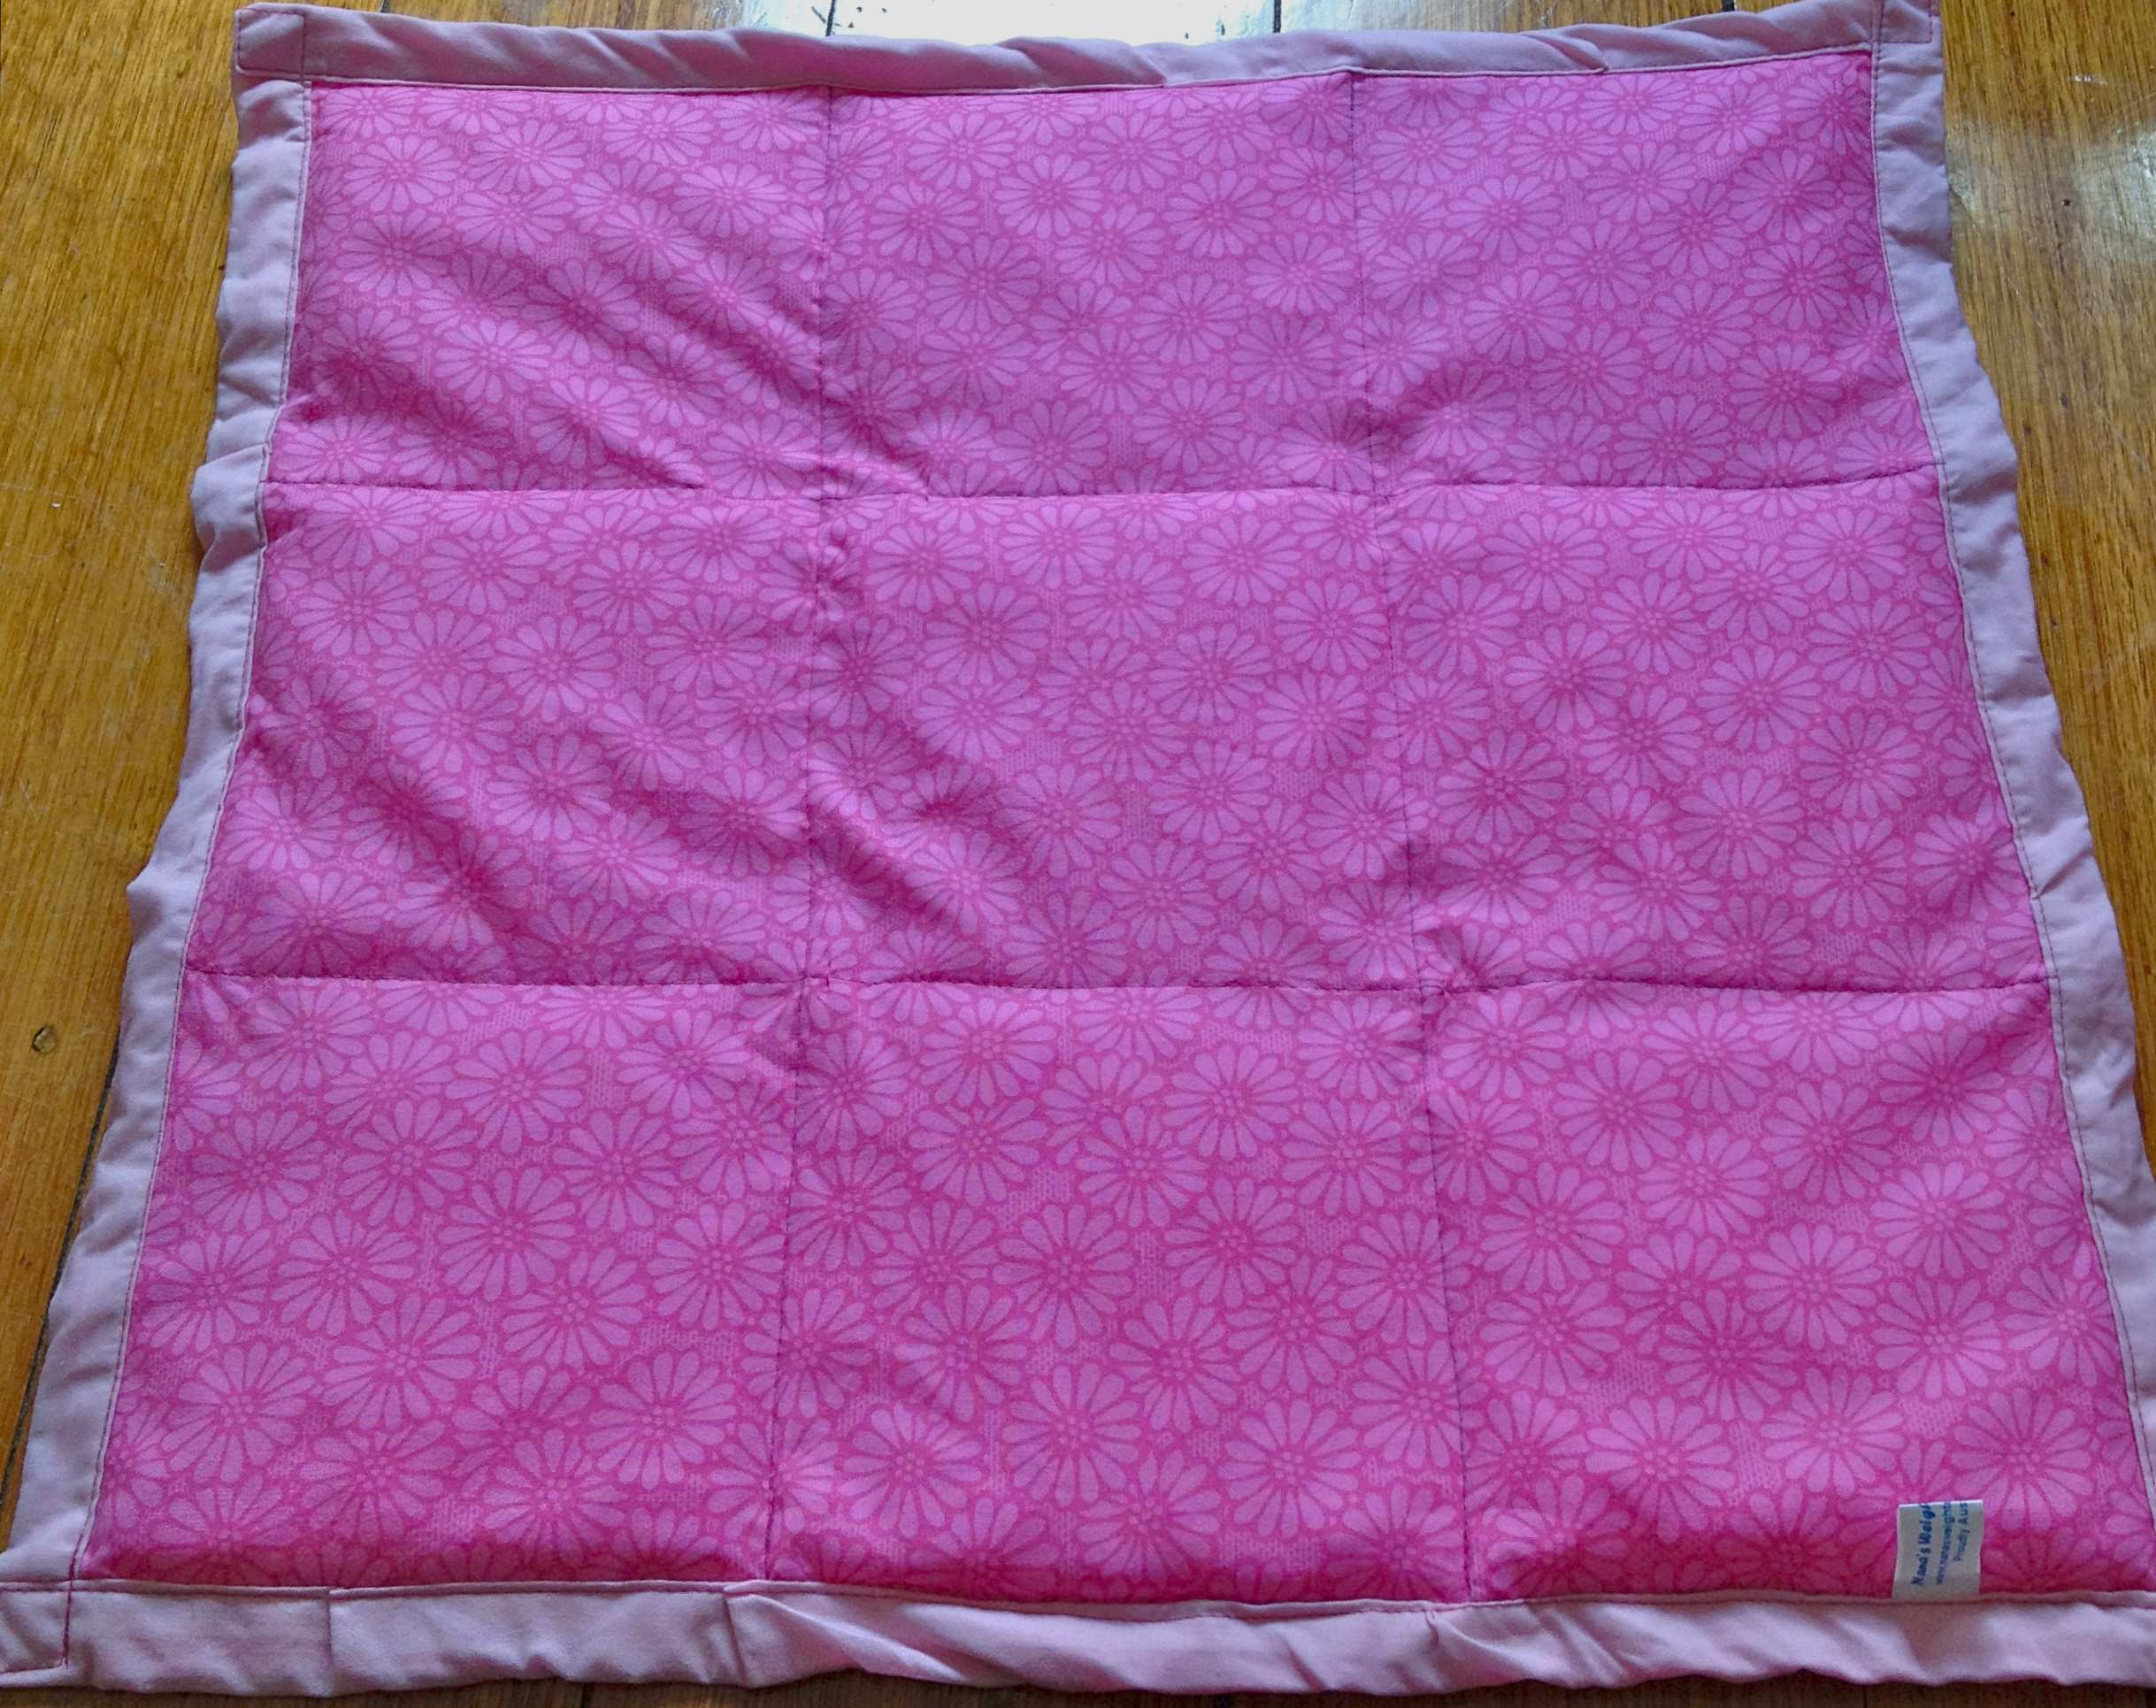 Many people have asked me howMany people have asked me howto make a weighted blanket. I put together this brief run down of how to make aMany people have asked me howMany people have asked me howto make a weighted blanket. I put together this brief run down of how to make ablanket. The links in the pictures will not work so I am